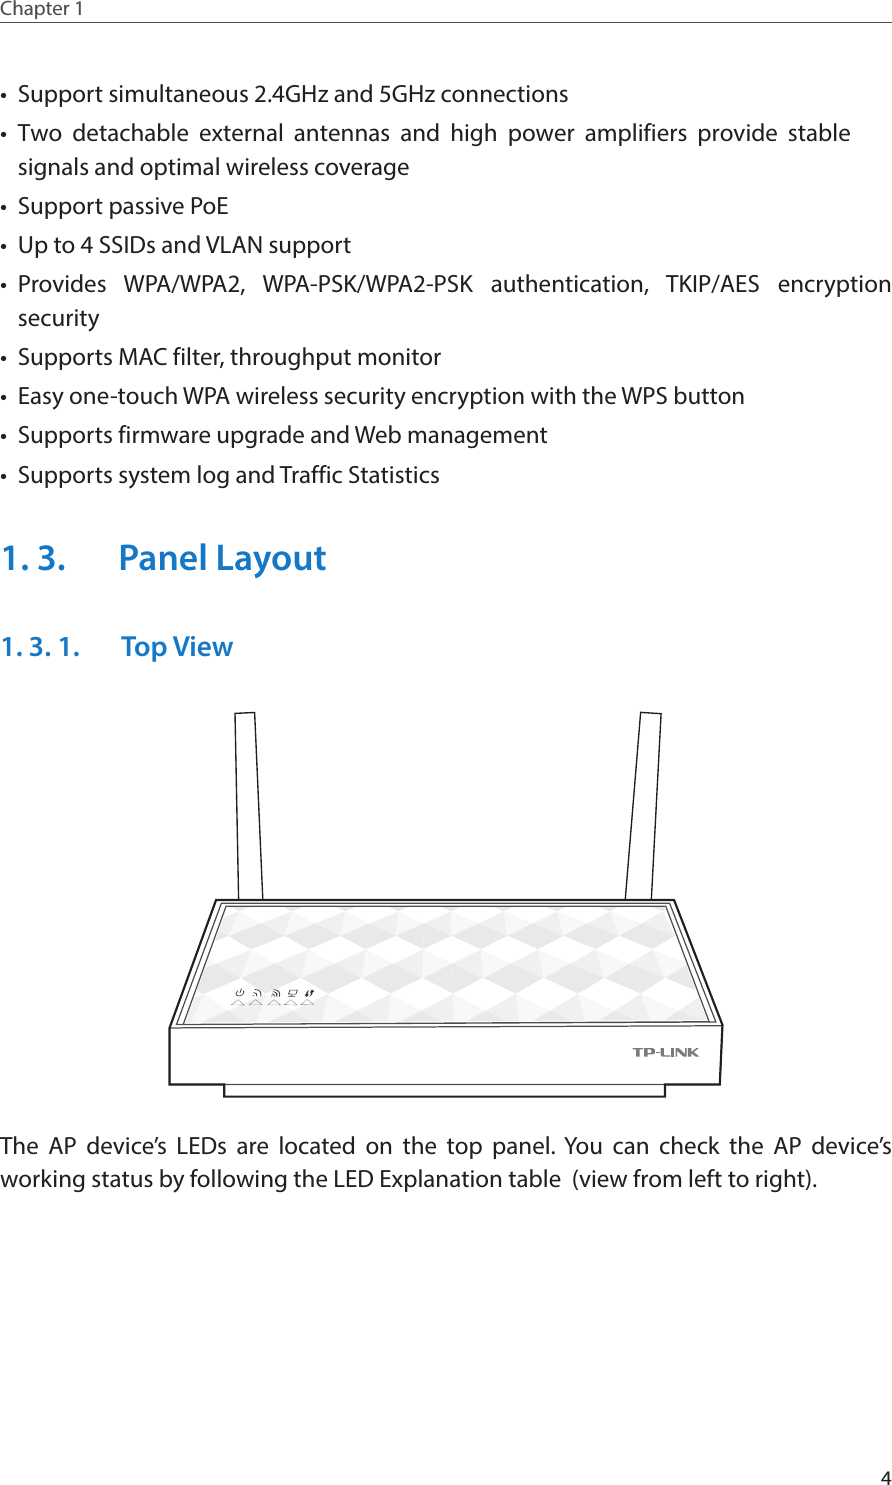 4Chapter 1  •  Support simultaneous 2.4GHz and 5GHz connections•  Two detachable external antennas and high power amplifiers provide stable signals and optimal wireless coverage•  Support passive PoE•  Up to 4 SSIDs and VLAN support•  Provides WPA/WPA2, WPA-PSK/WPA2-PSK authentication, TKIP/AES encryption security•  Supports MAC filter, throughput monitor•  Easy one-touch WPA wireless security encryption with the WPS button•  Supports firmware upgrade and Web management•  Supports system log and Traffic Statistics1. 3.  Panel Layout1. 3. 1.  Top ViewThe AP device’s LEDs are located on the top panel. You can check the AP device’s working status by following the LED Explanation table  (view from left to right).